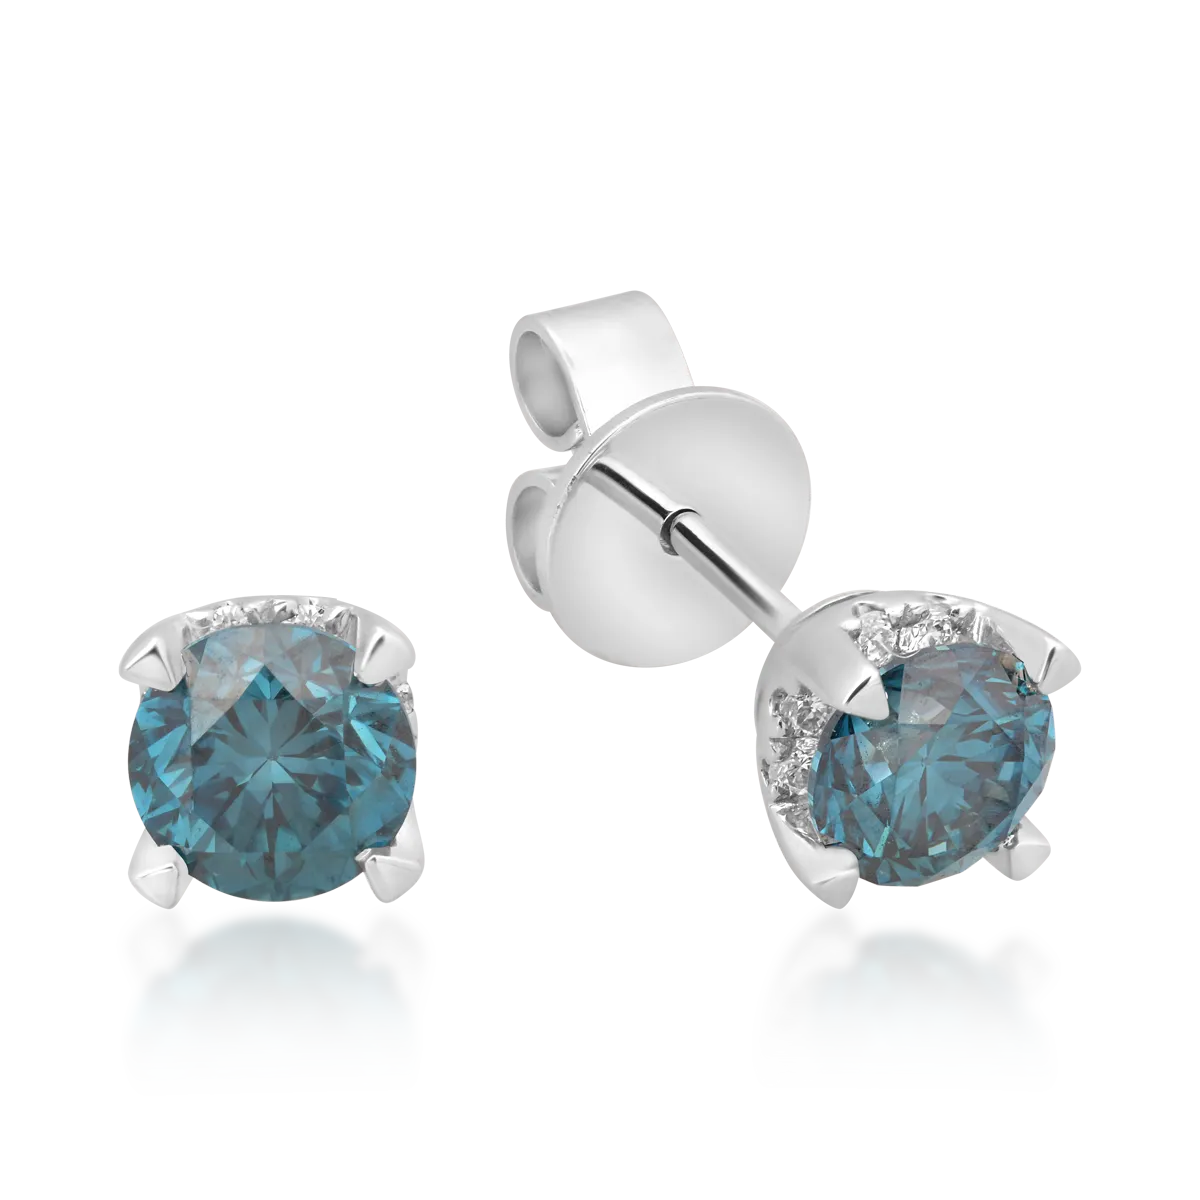 18K white gold earrings with 0.6ct blue diamonds and 0.08ct diamonds